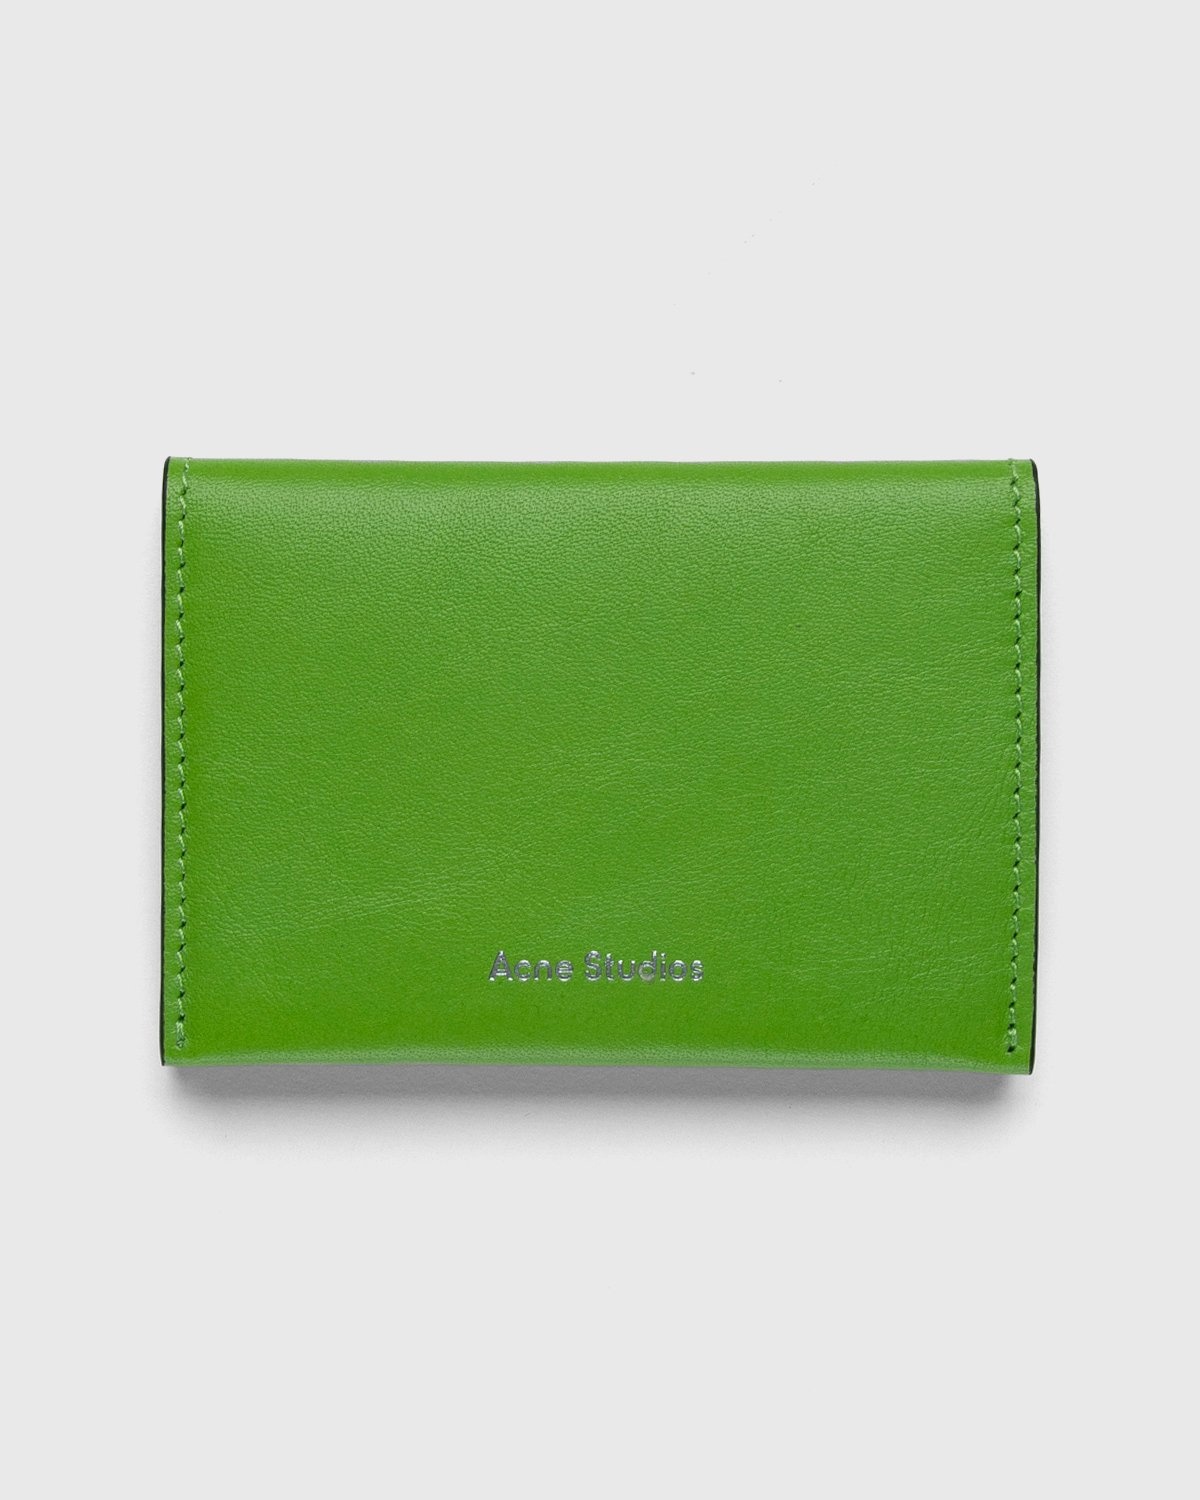 Acne Studios – Leather Card Case Multi Green - Wallets - Green - Image 1